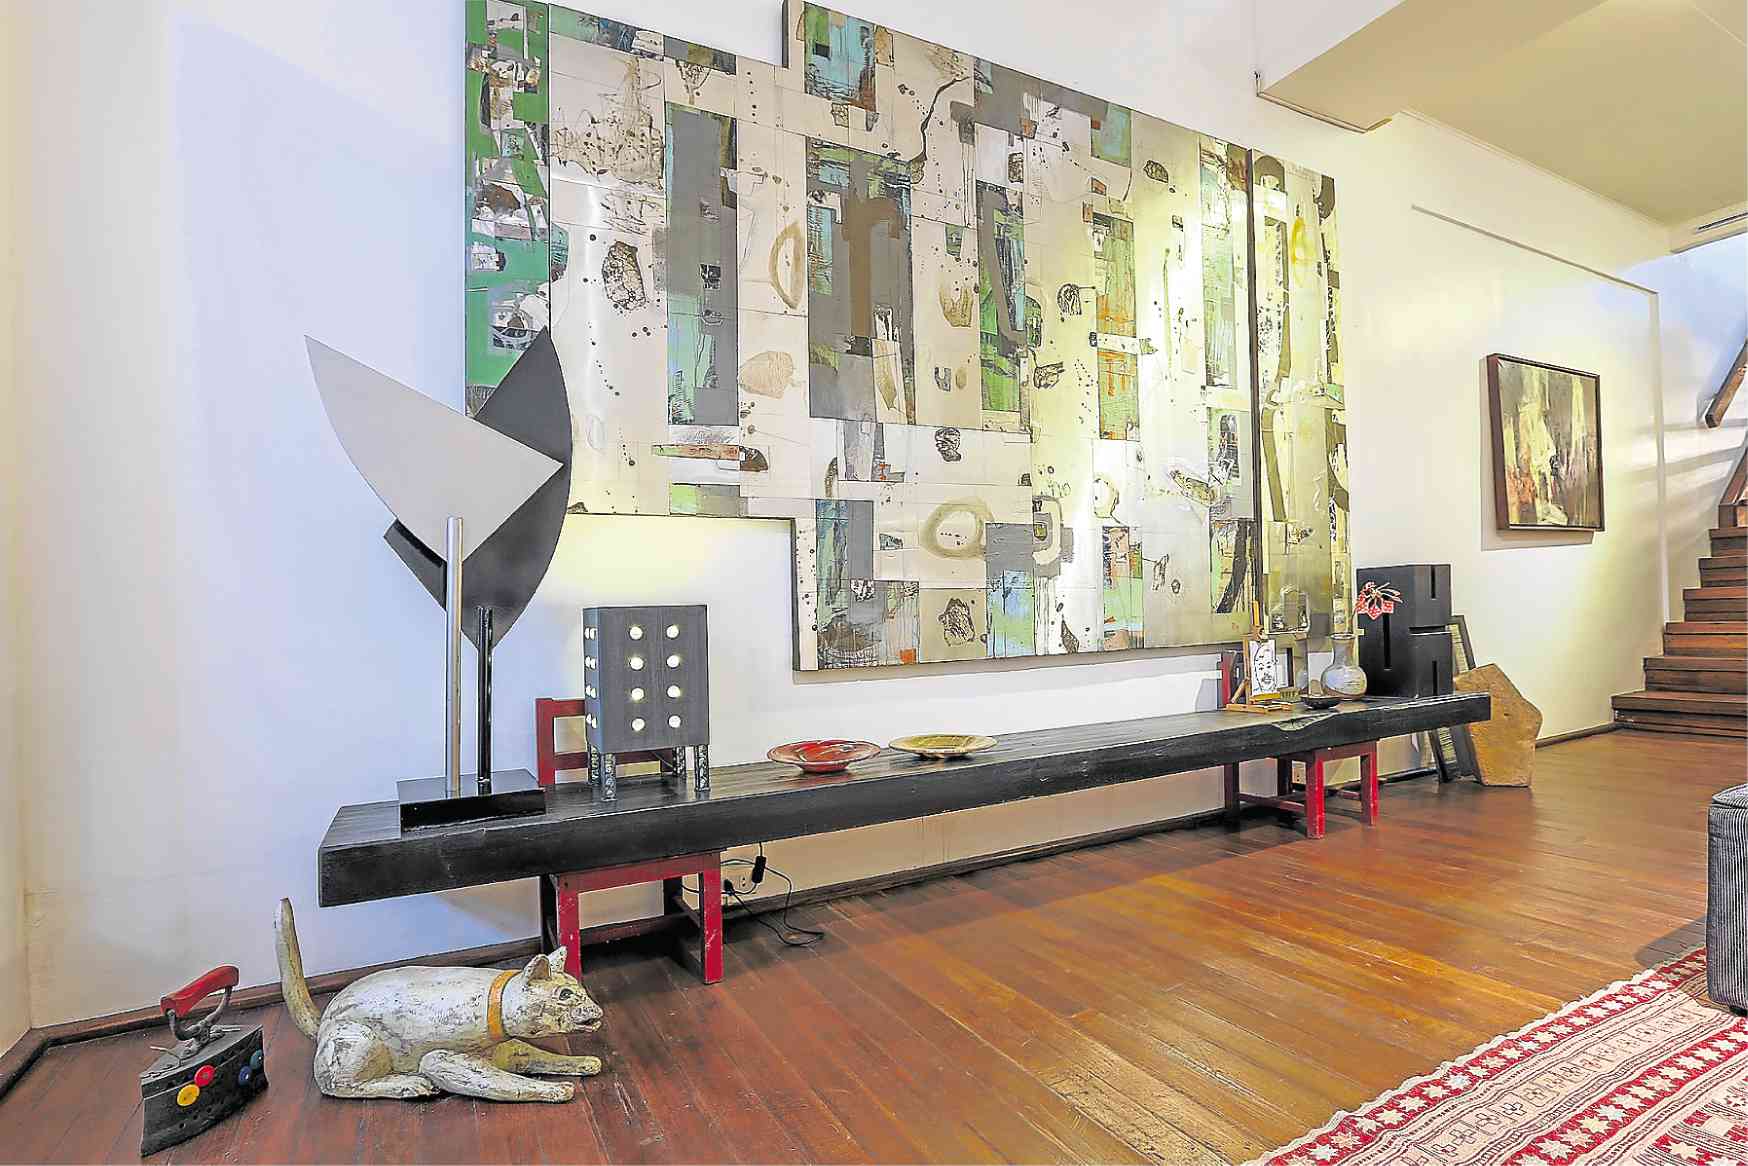 How gallery owner Albert Avellana curates his home